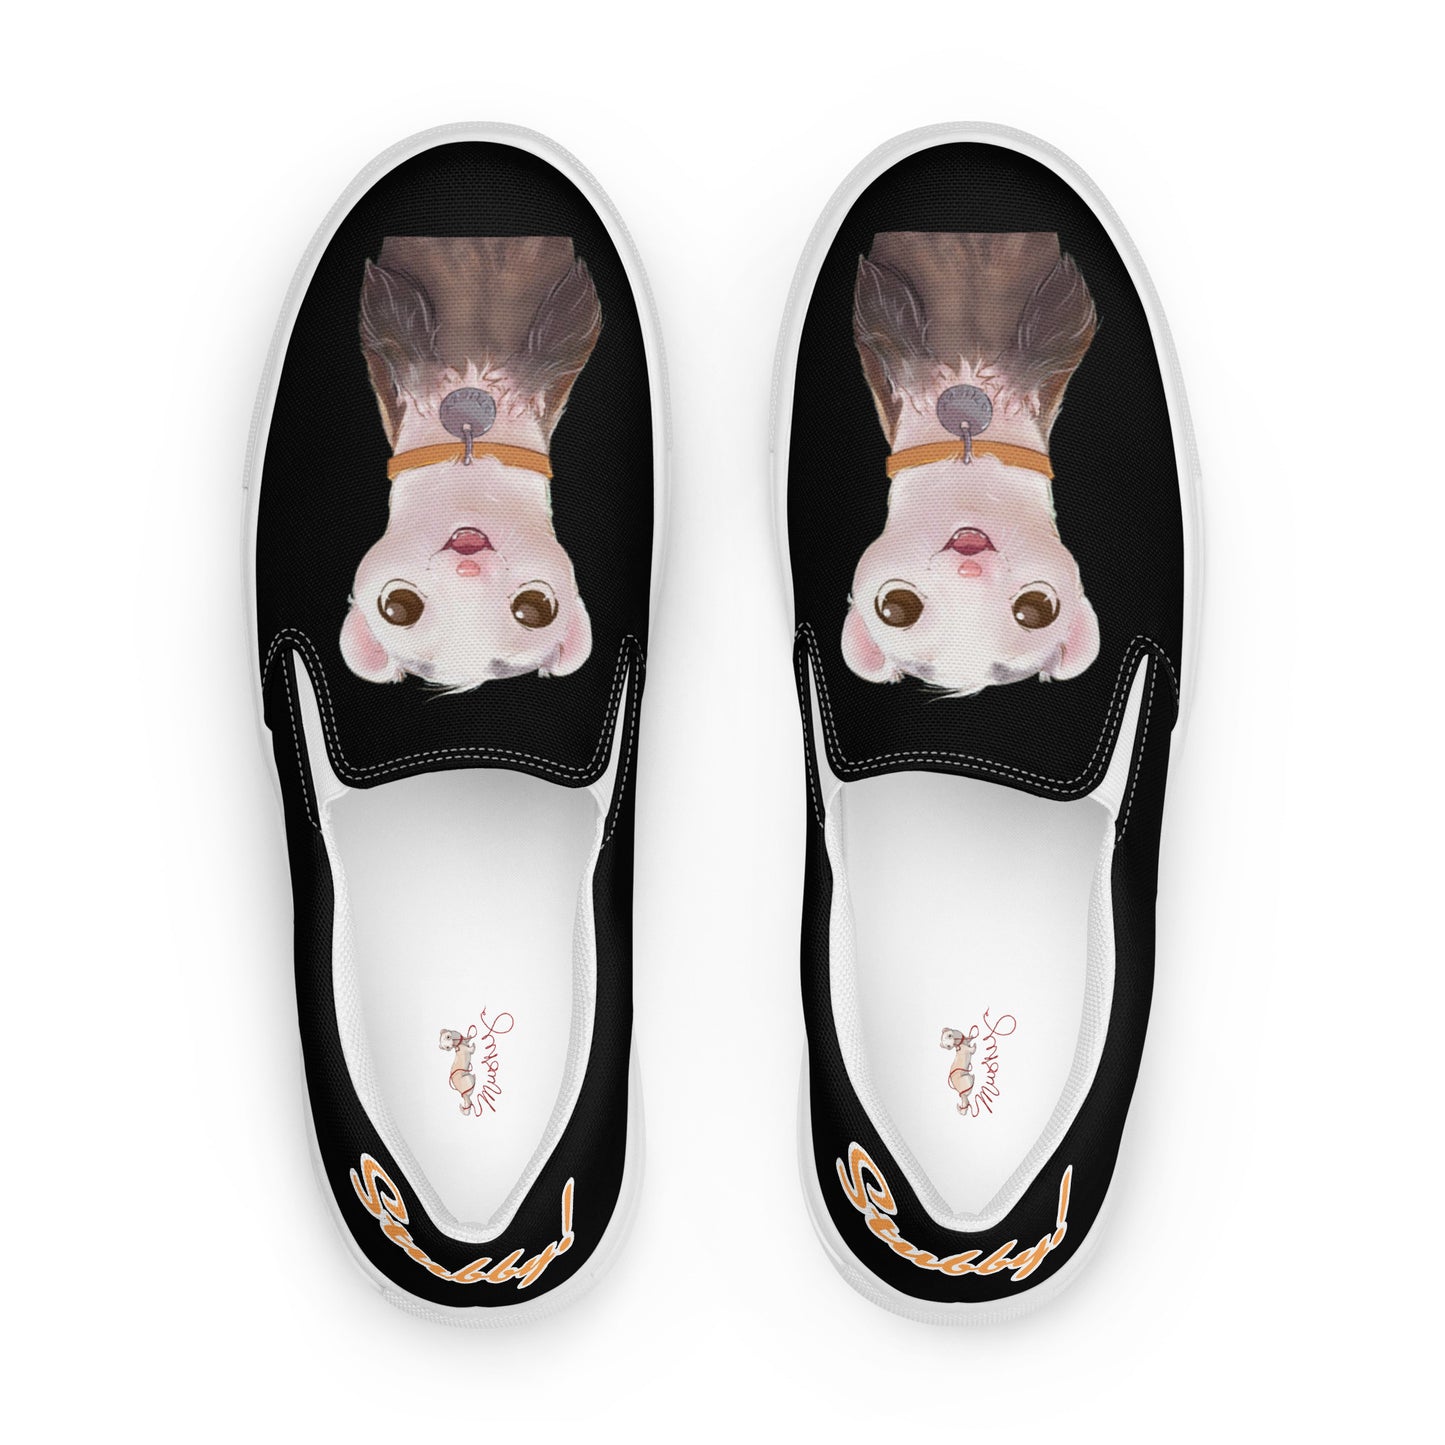 "My Name is Musky! Stubby's Story" Women's Slip On Canvas Shoes!